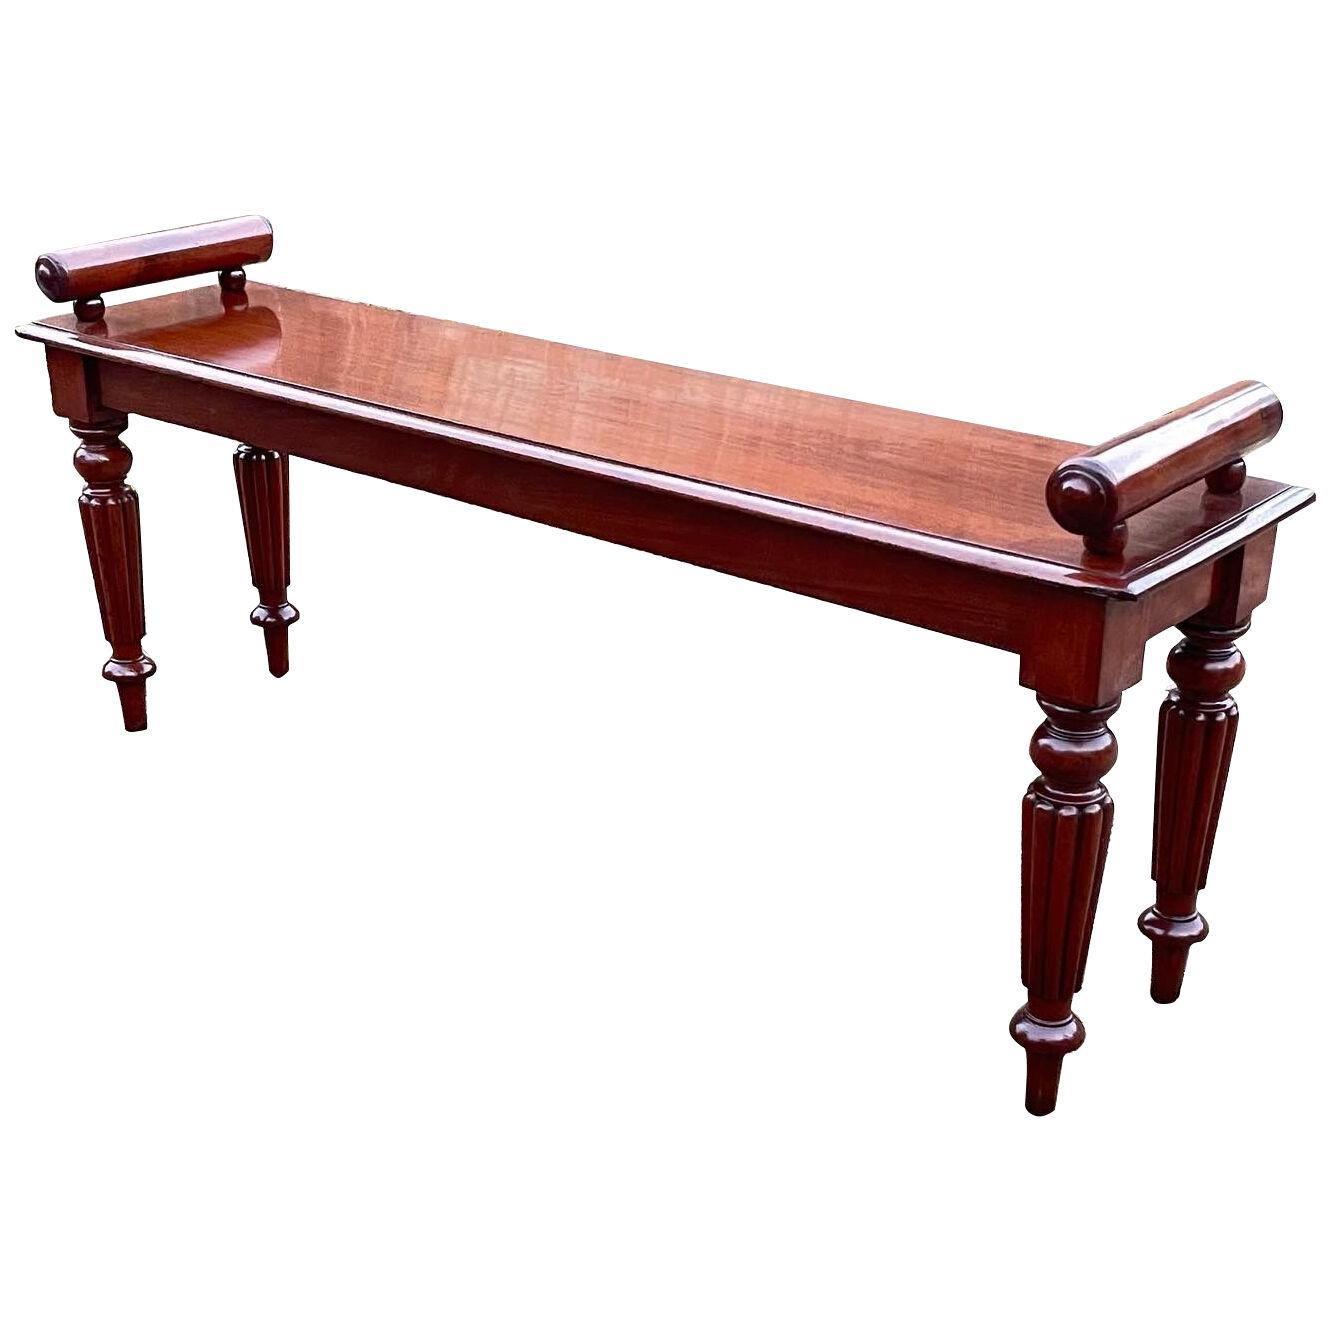 Regency period mahogany bench in the manner of Gillows.